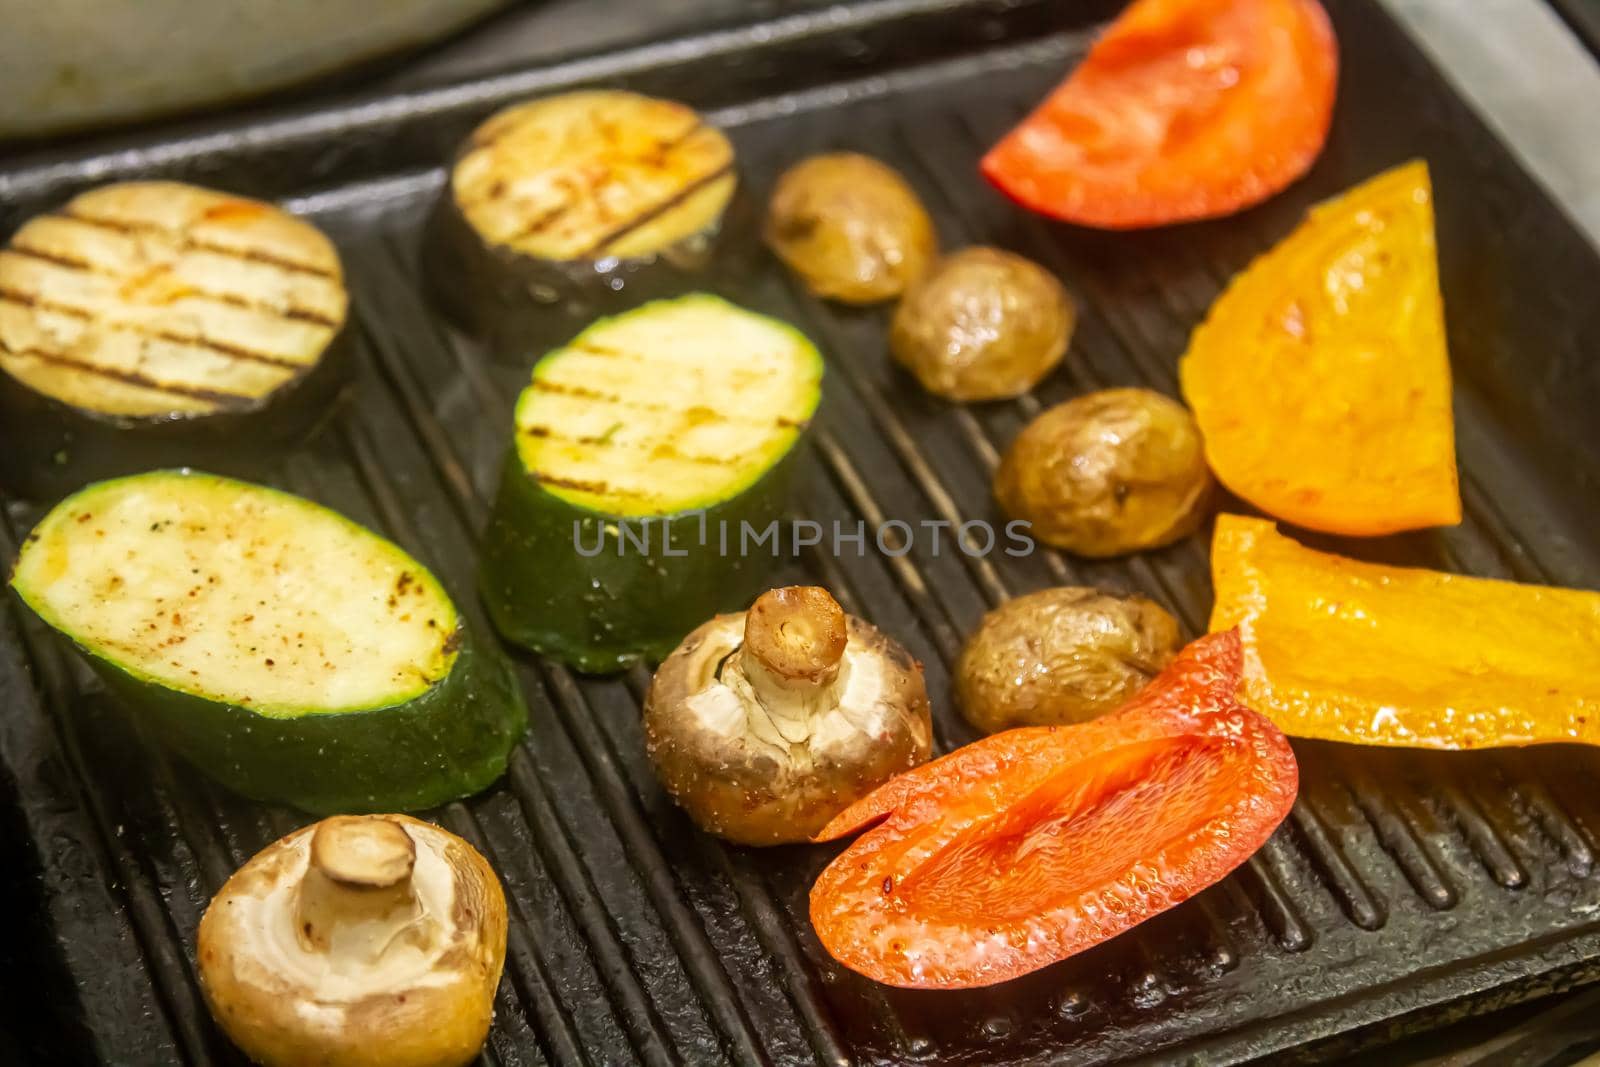 Grilled vegetables: tomatoes, corn, eggplant, zucchini, mushrooms, sweet peppers are prepared in a professional grill machine. Chef grills vegetables in the restaurant kitchen by Milanchikov